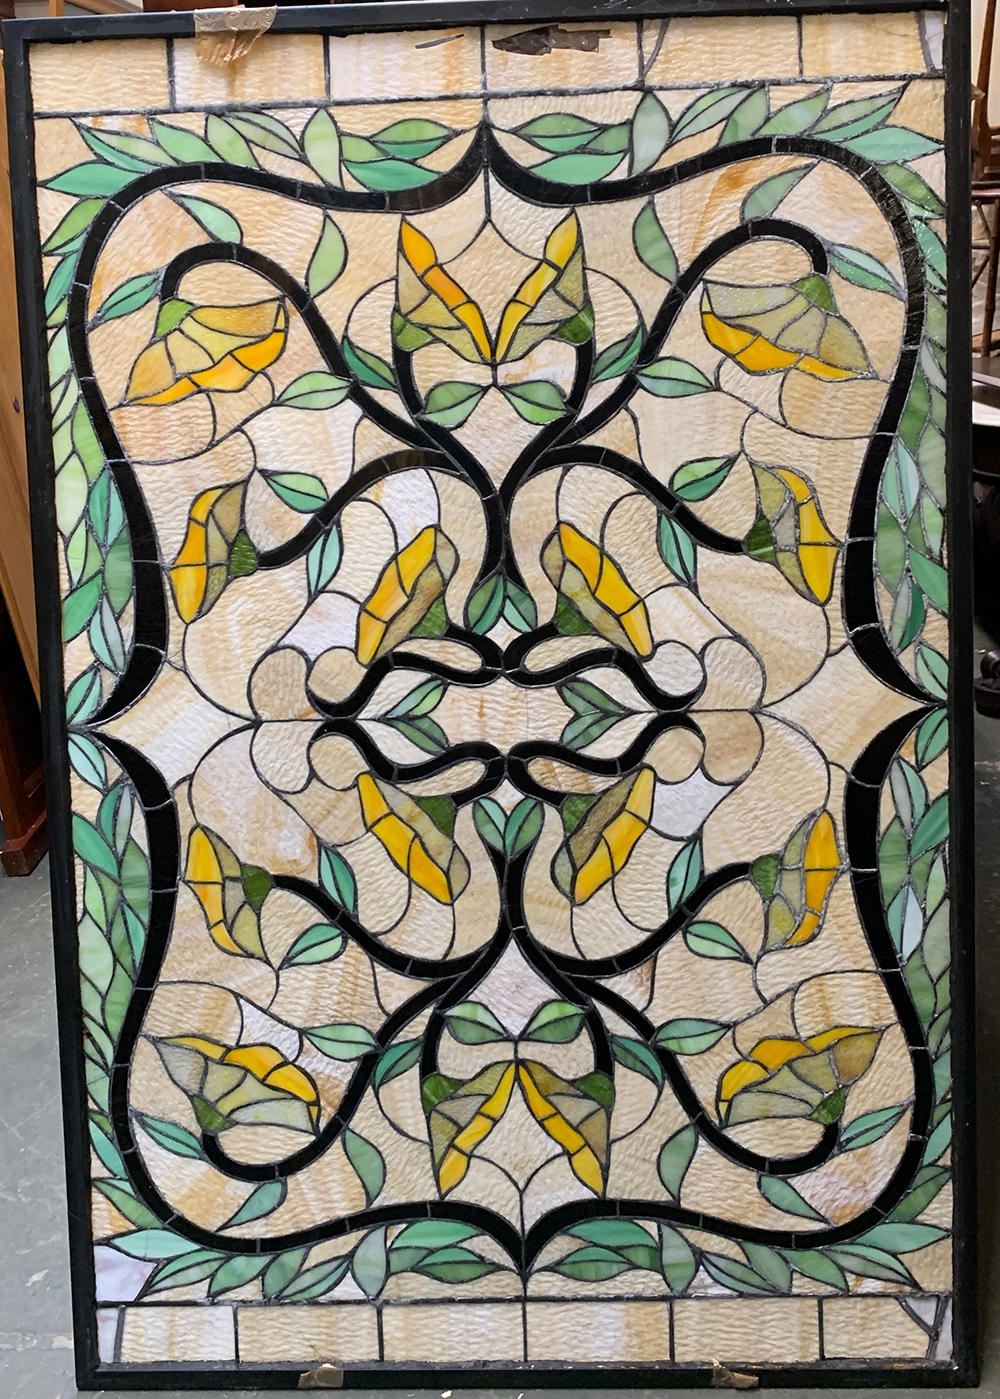 Four stained glass panels with floral design, all af, 91x139cm